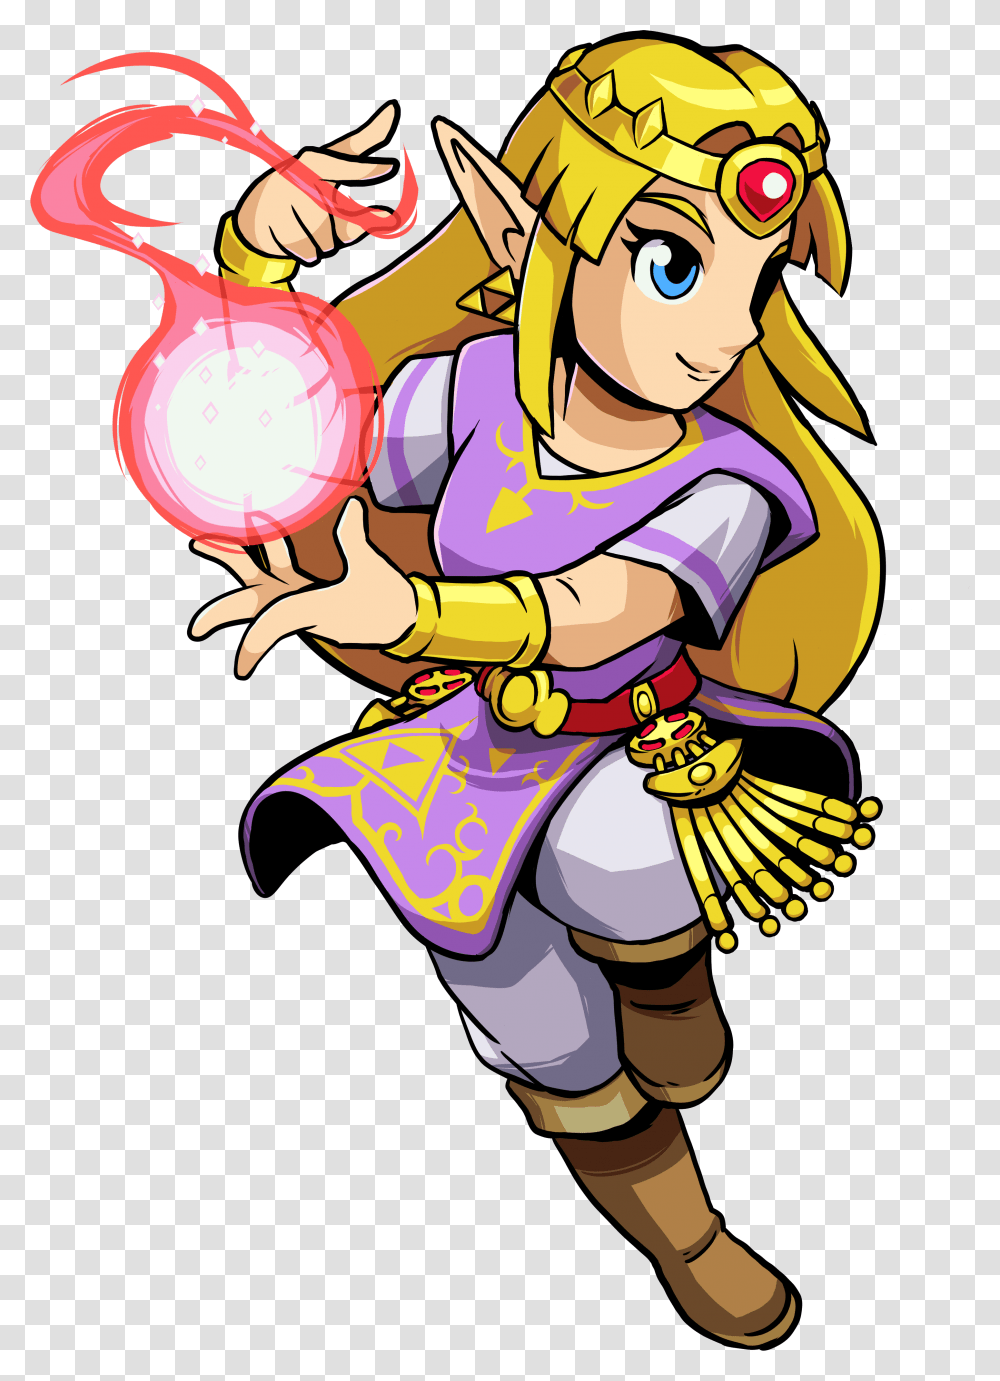 Cadence Of Hyrule Crypt Of The Necrodancer Featuring Legend Of Zelda Cadence Of Hyrule, Person, Costume, Manga, Comics Transparent Png